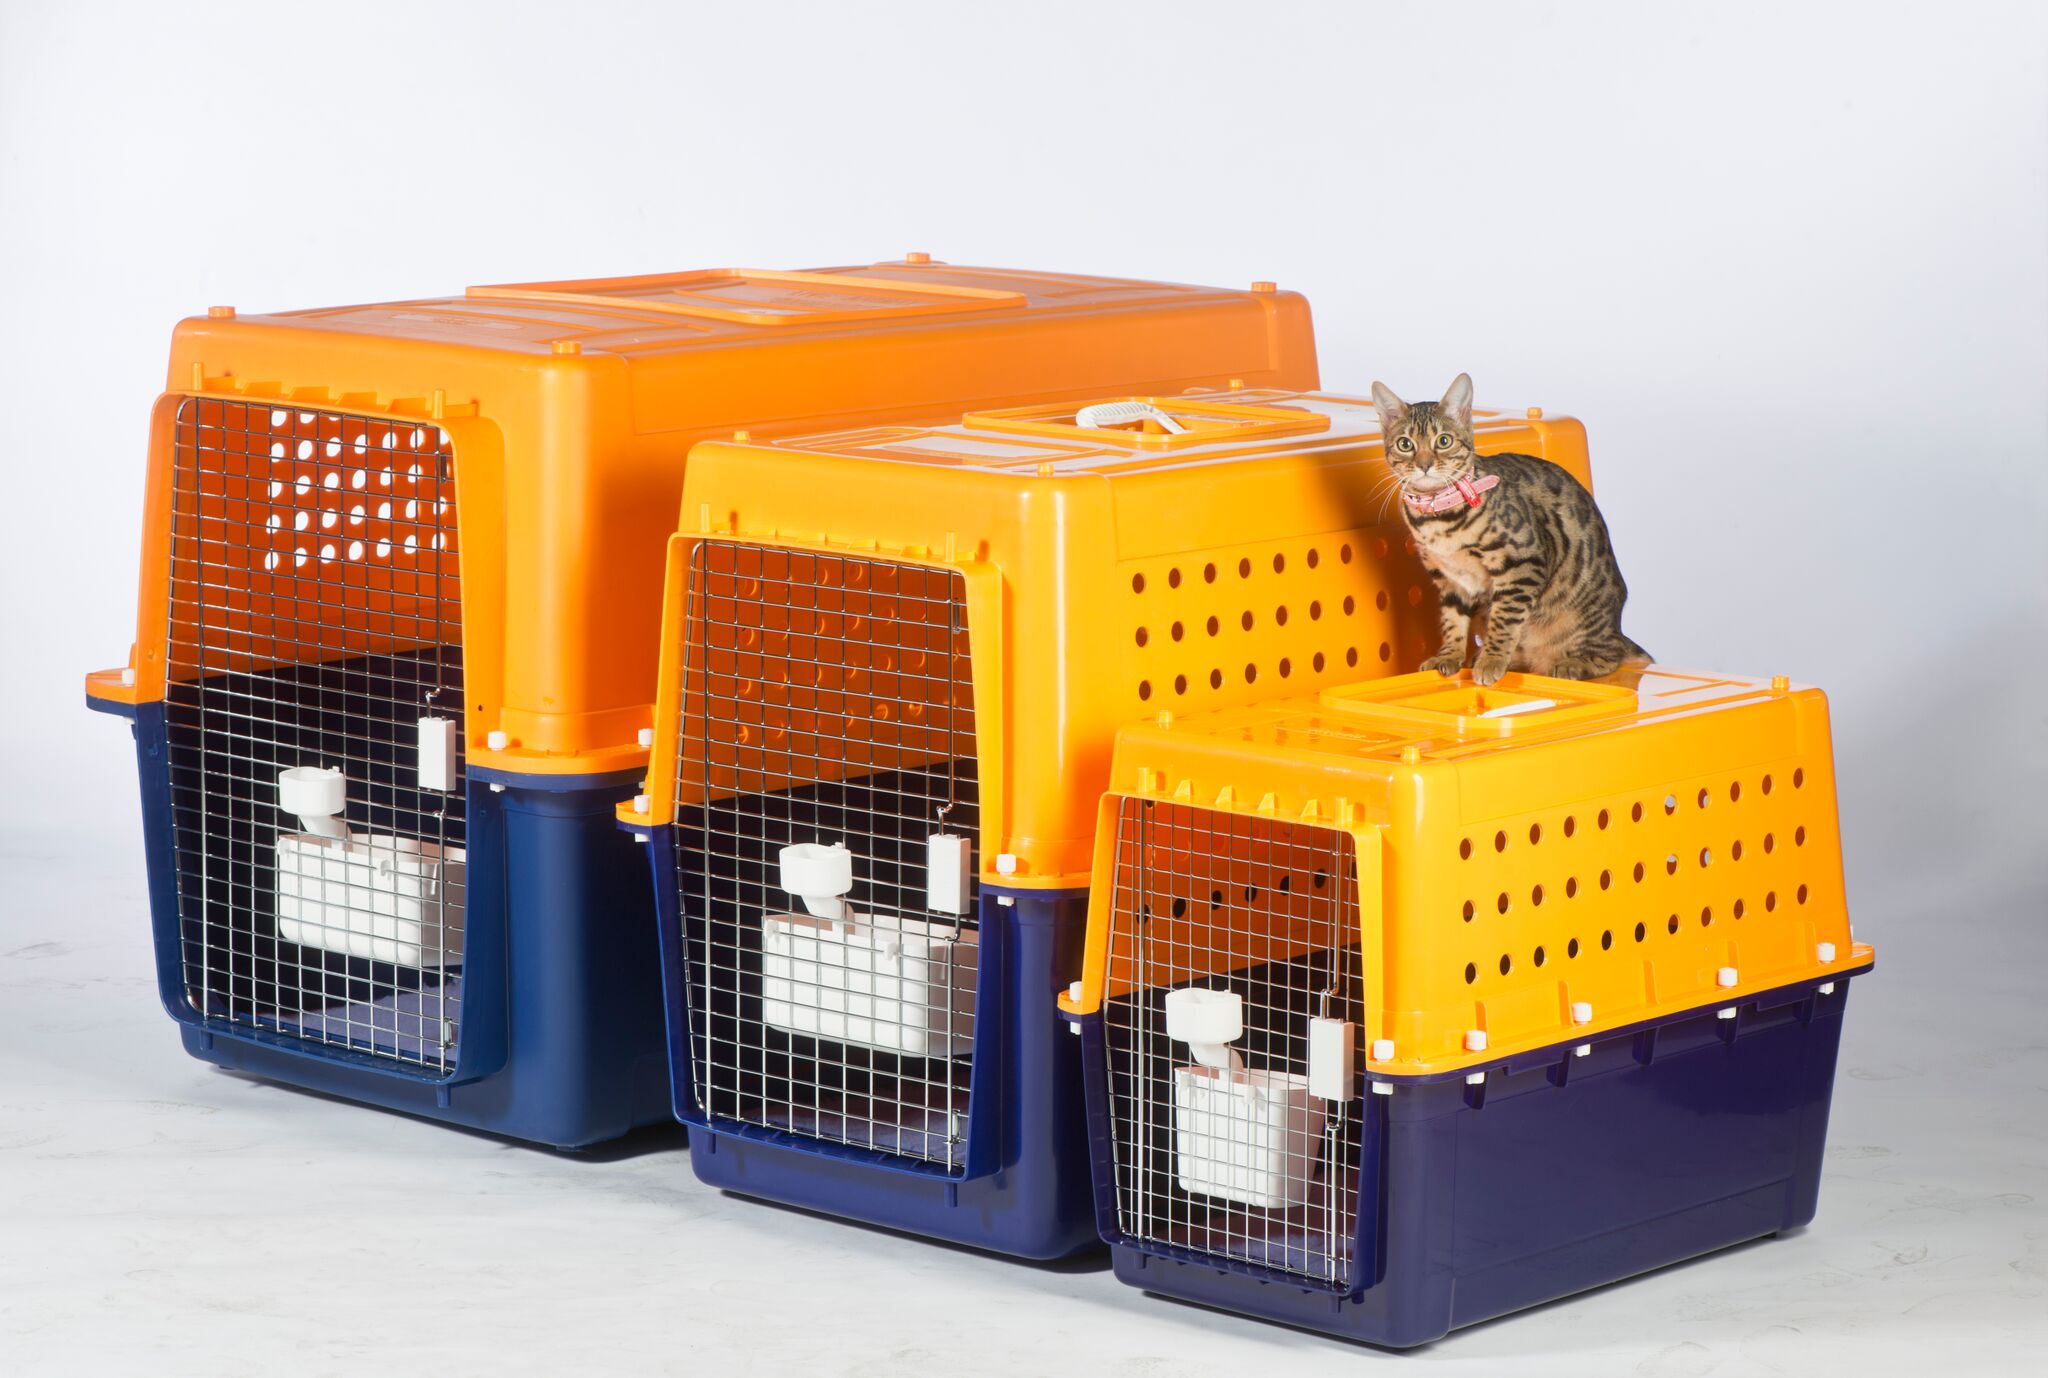 pet travel crates airline approved